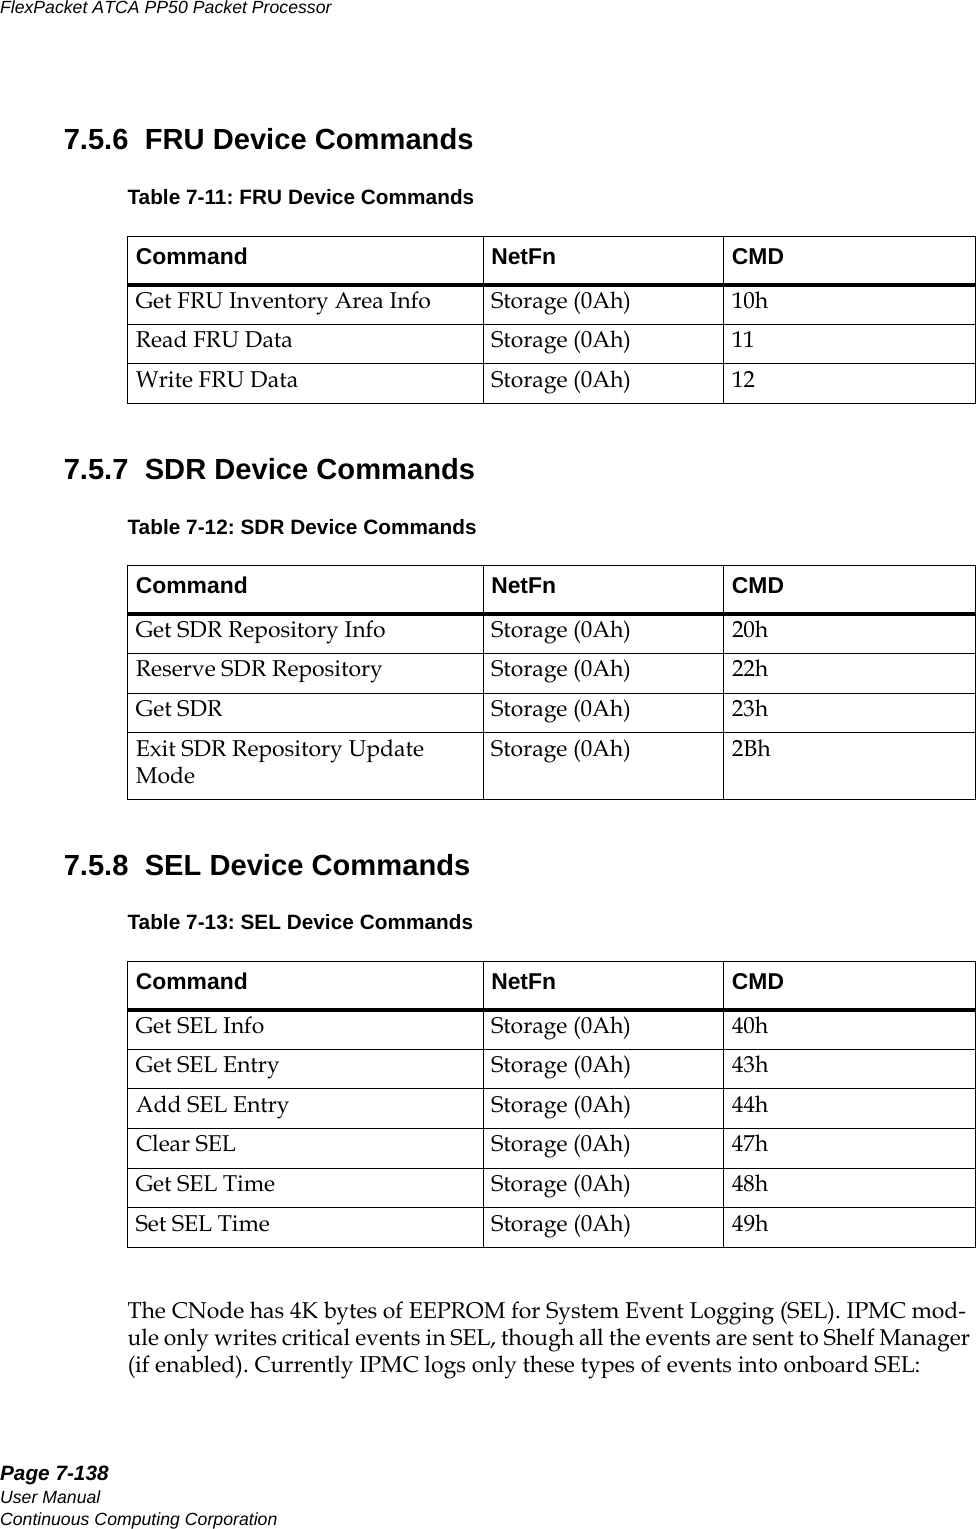 Page 7-138User ManualContinuous Computing CorporationFlexPacket ATCA PP50 Packet Processor     Preliminary7.5.6  FRU Device Commands7.5.7  SDR Device Commands7.5.8  SEL Device CommandsThe CNode has 4K bytes of EEPROM for System Event Logging (SEL). IPMC mod-ule only writes critical events in SEL, though all the events are sent to Shelf Manager (if enabled). Currently IPMC logs only these types of events into onboard SEL:Table 7-11: FRU Device CommandsCommand NetFn CMDGet FRU Inventory Area Info Storage (0Ah) 10hRead FRU Data Storage (0Ah) 11Write FRU Data Storage (0Ah) 12Table 7-12: SDR Device CommandsCommand NetFn CMDGet SDR Repository Info Storage (0Ah) 20hReserve SDR Repository Storage (0Ah) 22hGet SDR Storage (0Ah) 23hExit SDR Repository Update ModeStorage (0Ah) 2BhTable 7-13: SEL Device CommandsCommand NetFn CMDGet SEL Info Storage (0Ah) 40hGet SEL Entry Storage (0Ah) 43hAdd SEL Entry Storage (0Ah) 44hClear SEL Storage (0Ah) 47hGet SEL Time Storage (0Ah) 48hSet SEL Time Storage (0Ah) 49h